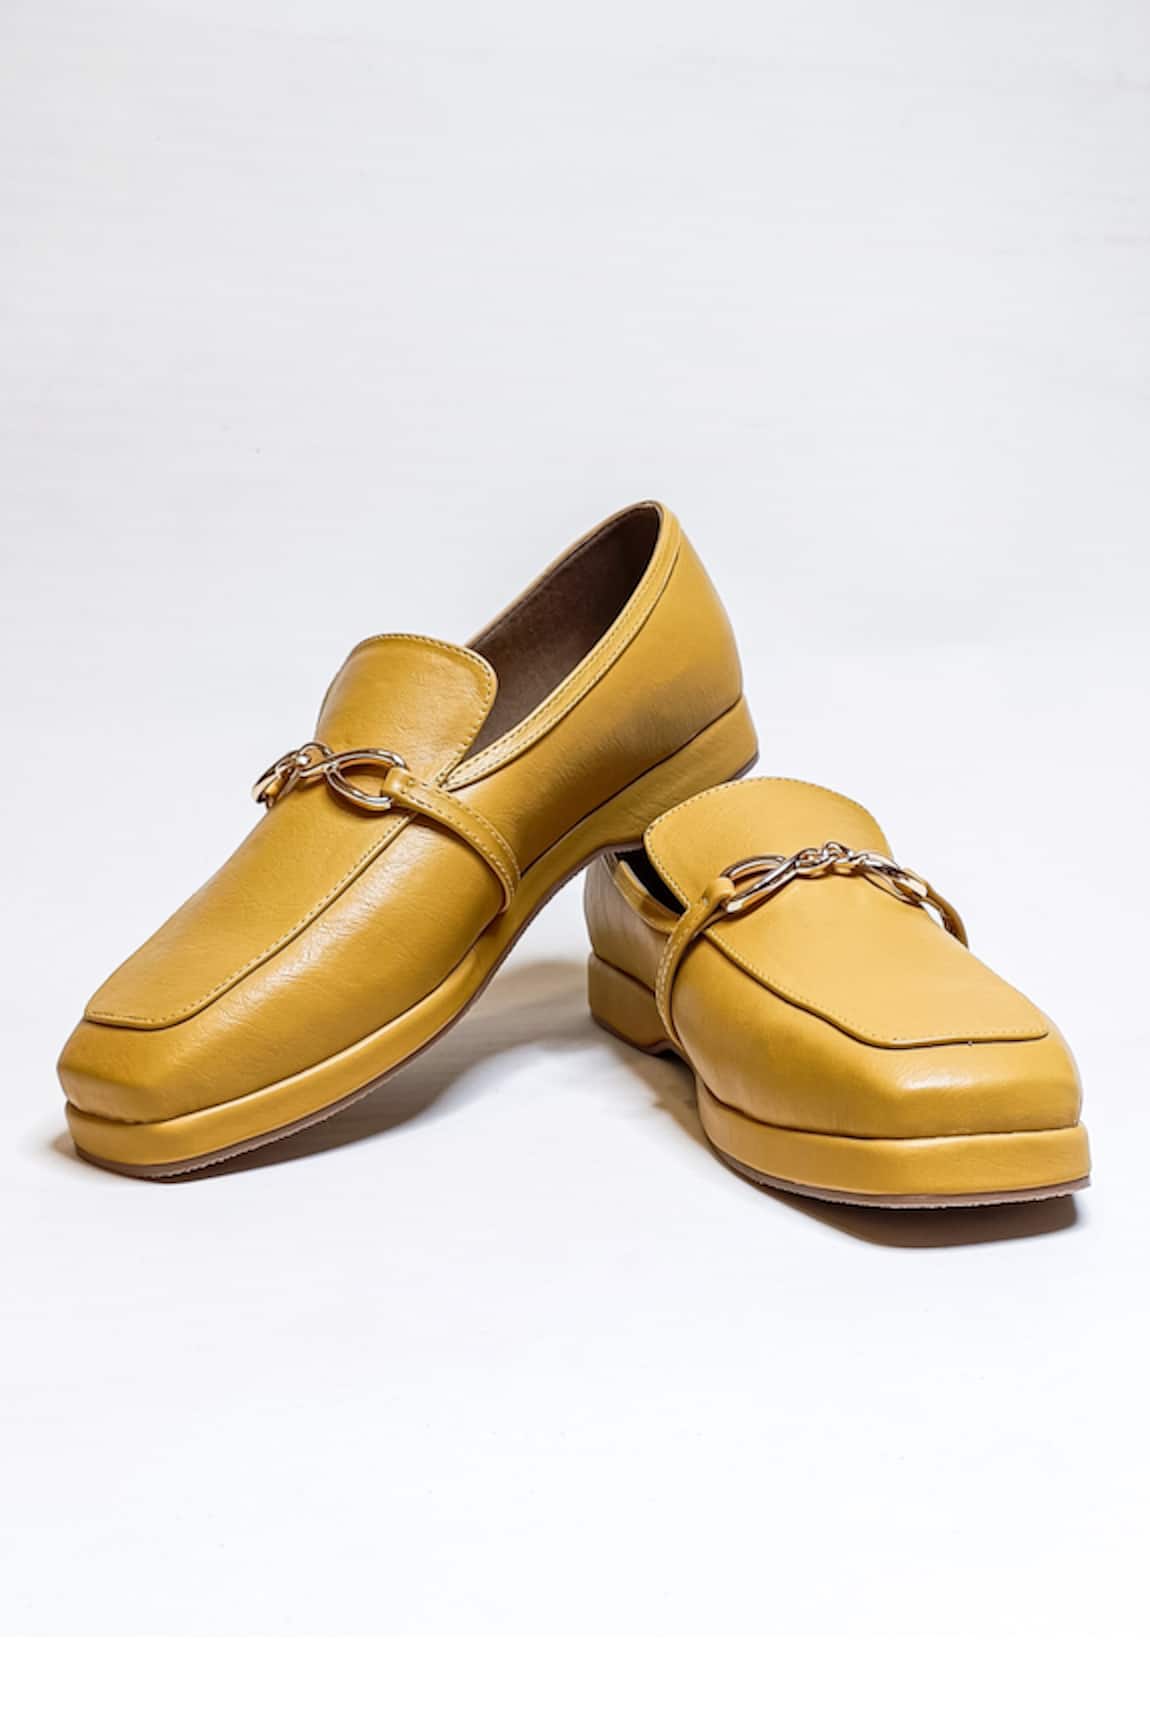 THE ALTER Buckle Detail Loafers